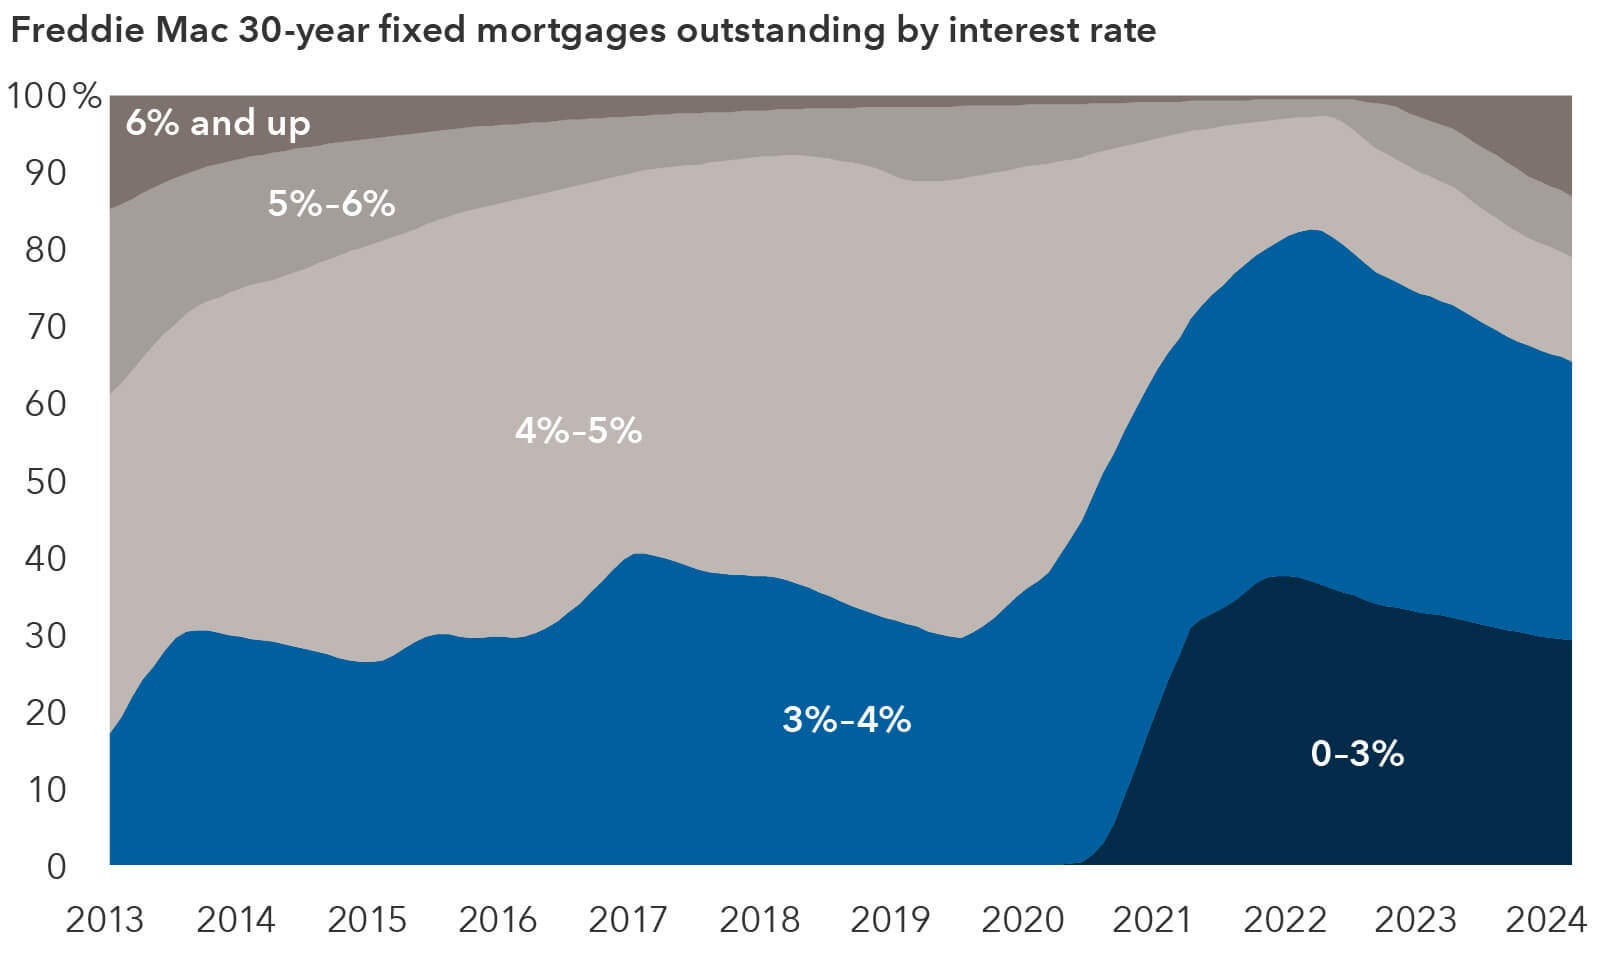 Image shows a stacked area chart of Freddie Mac 30-year fixed mortgages on a percentage basis, bucketed by their interest rates from 2013 to 2024. From 2013 to 2020, the largest portion of these mortgages had an interest rate between 4% and 5%. The next largest portion of these mortgages had an interest rate between 3% and 4%. Mortgages with interest rates between 5% and 6% are the next largest group followed by mortgages with interest rates over 6%. There were no mortgages in this group with interest rates under three percent during this period. Beginning in 2020; however, this changes. The portion of mortgages with interest rates below 3% surges around 30% of the total. Mortgages with interest rates between 3% and 4% also grew, representing as much as 40% of the total pool. As of 2024, the number of mortgages with interest rates below 4% shrunk from its peak, but still cumulatively represents close to 65% of the total pool. Mortgages with rates over 6% have grown from close to zero in late 2020 to approximately 10% of the total pool in 2024.